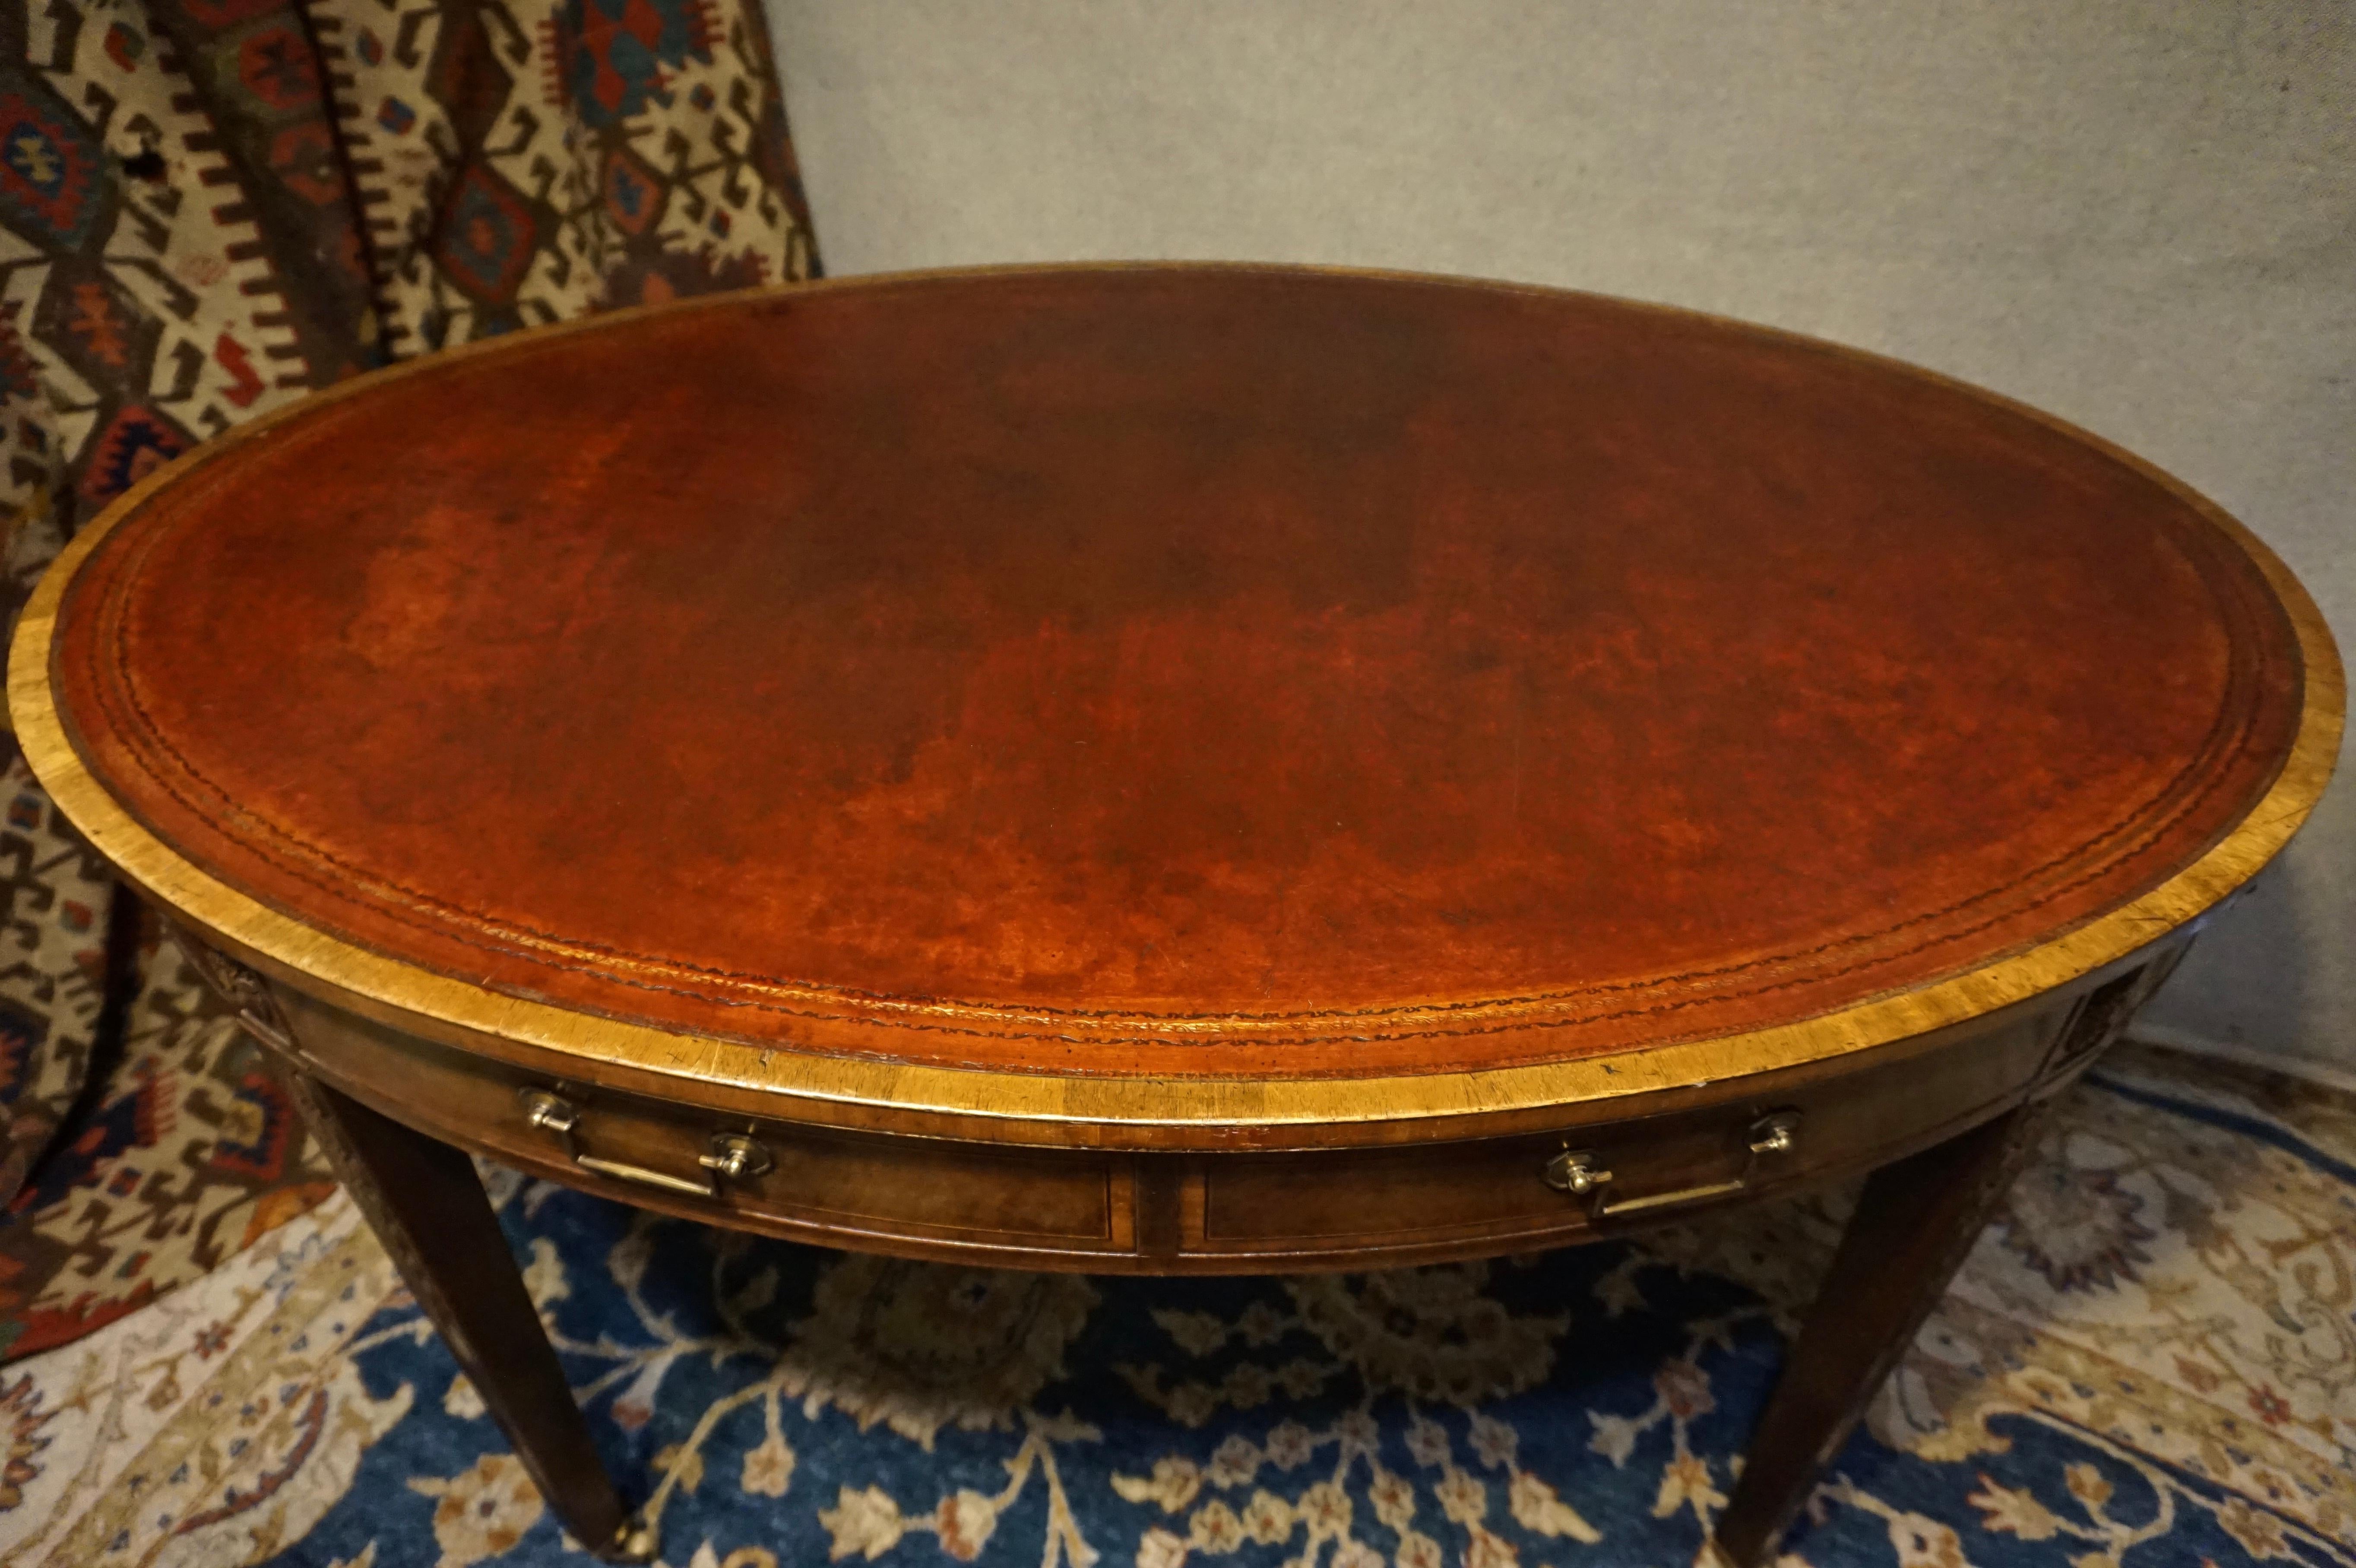 English Regency Revival Mahogany Oval Table with Gilt Leather Top 1